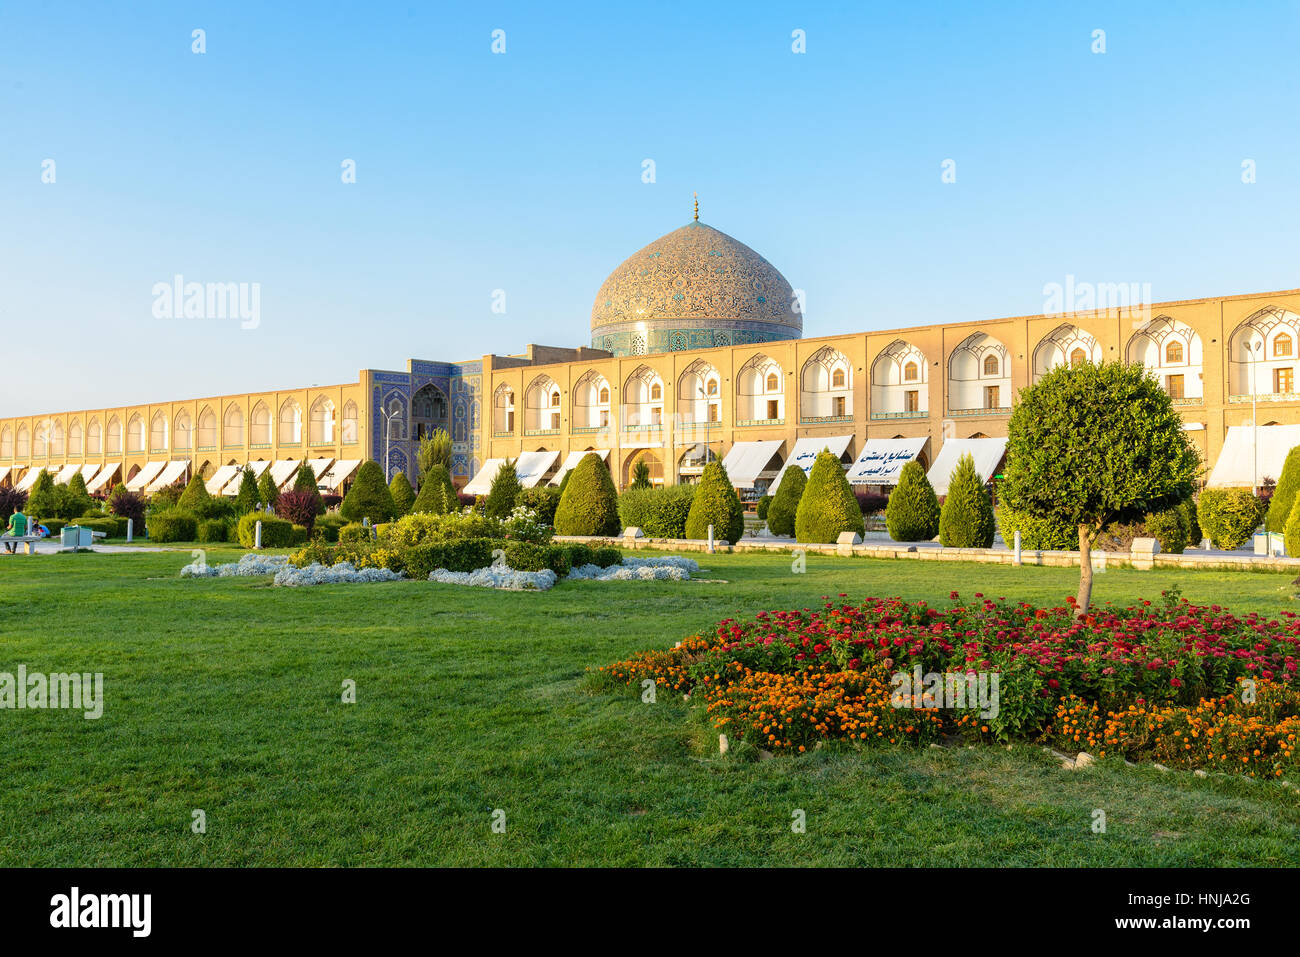 ISFAHAN, IRAN - AUG 28, 2016: Sheikh Lotfollah Mosque east of Naqsh-e Jahan Square, Isfahan - one of the UNESCO world heritage sites Stock Photo